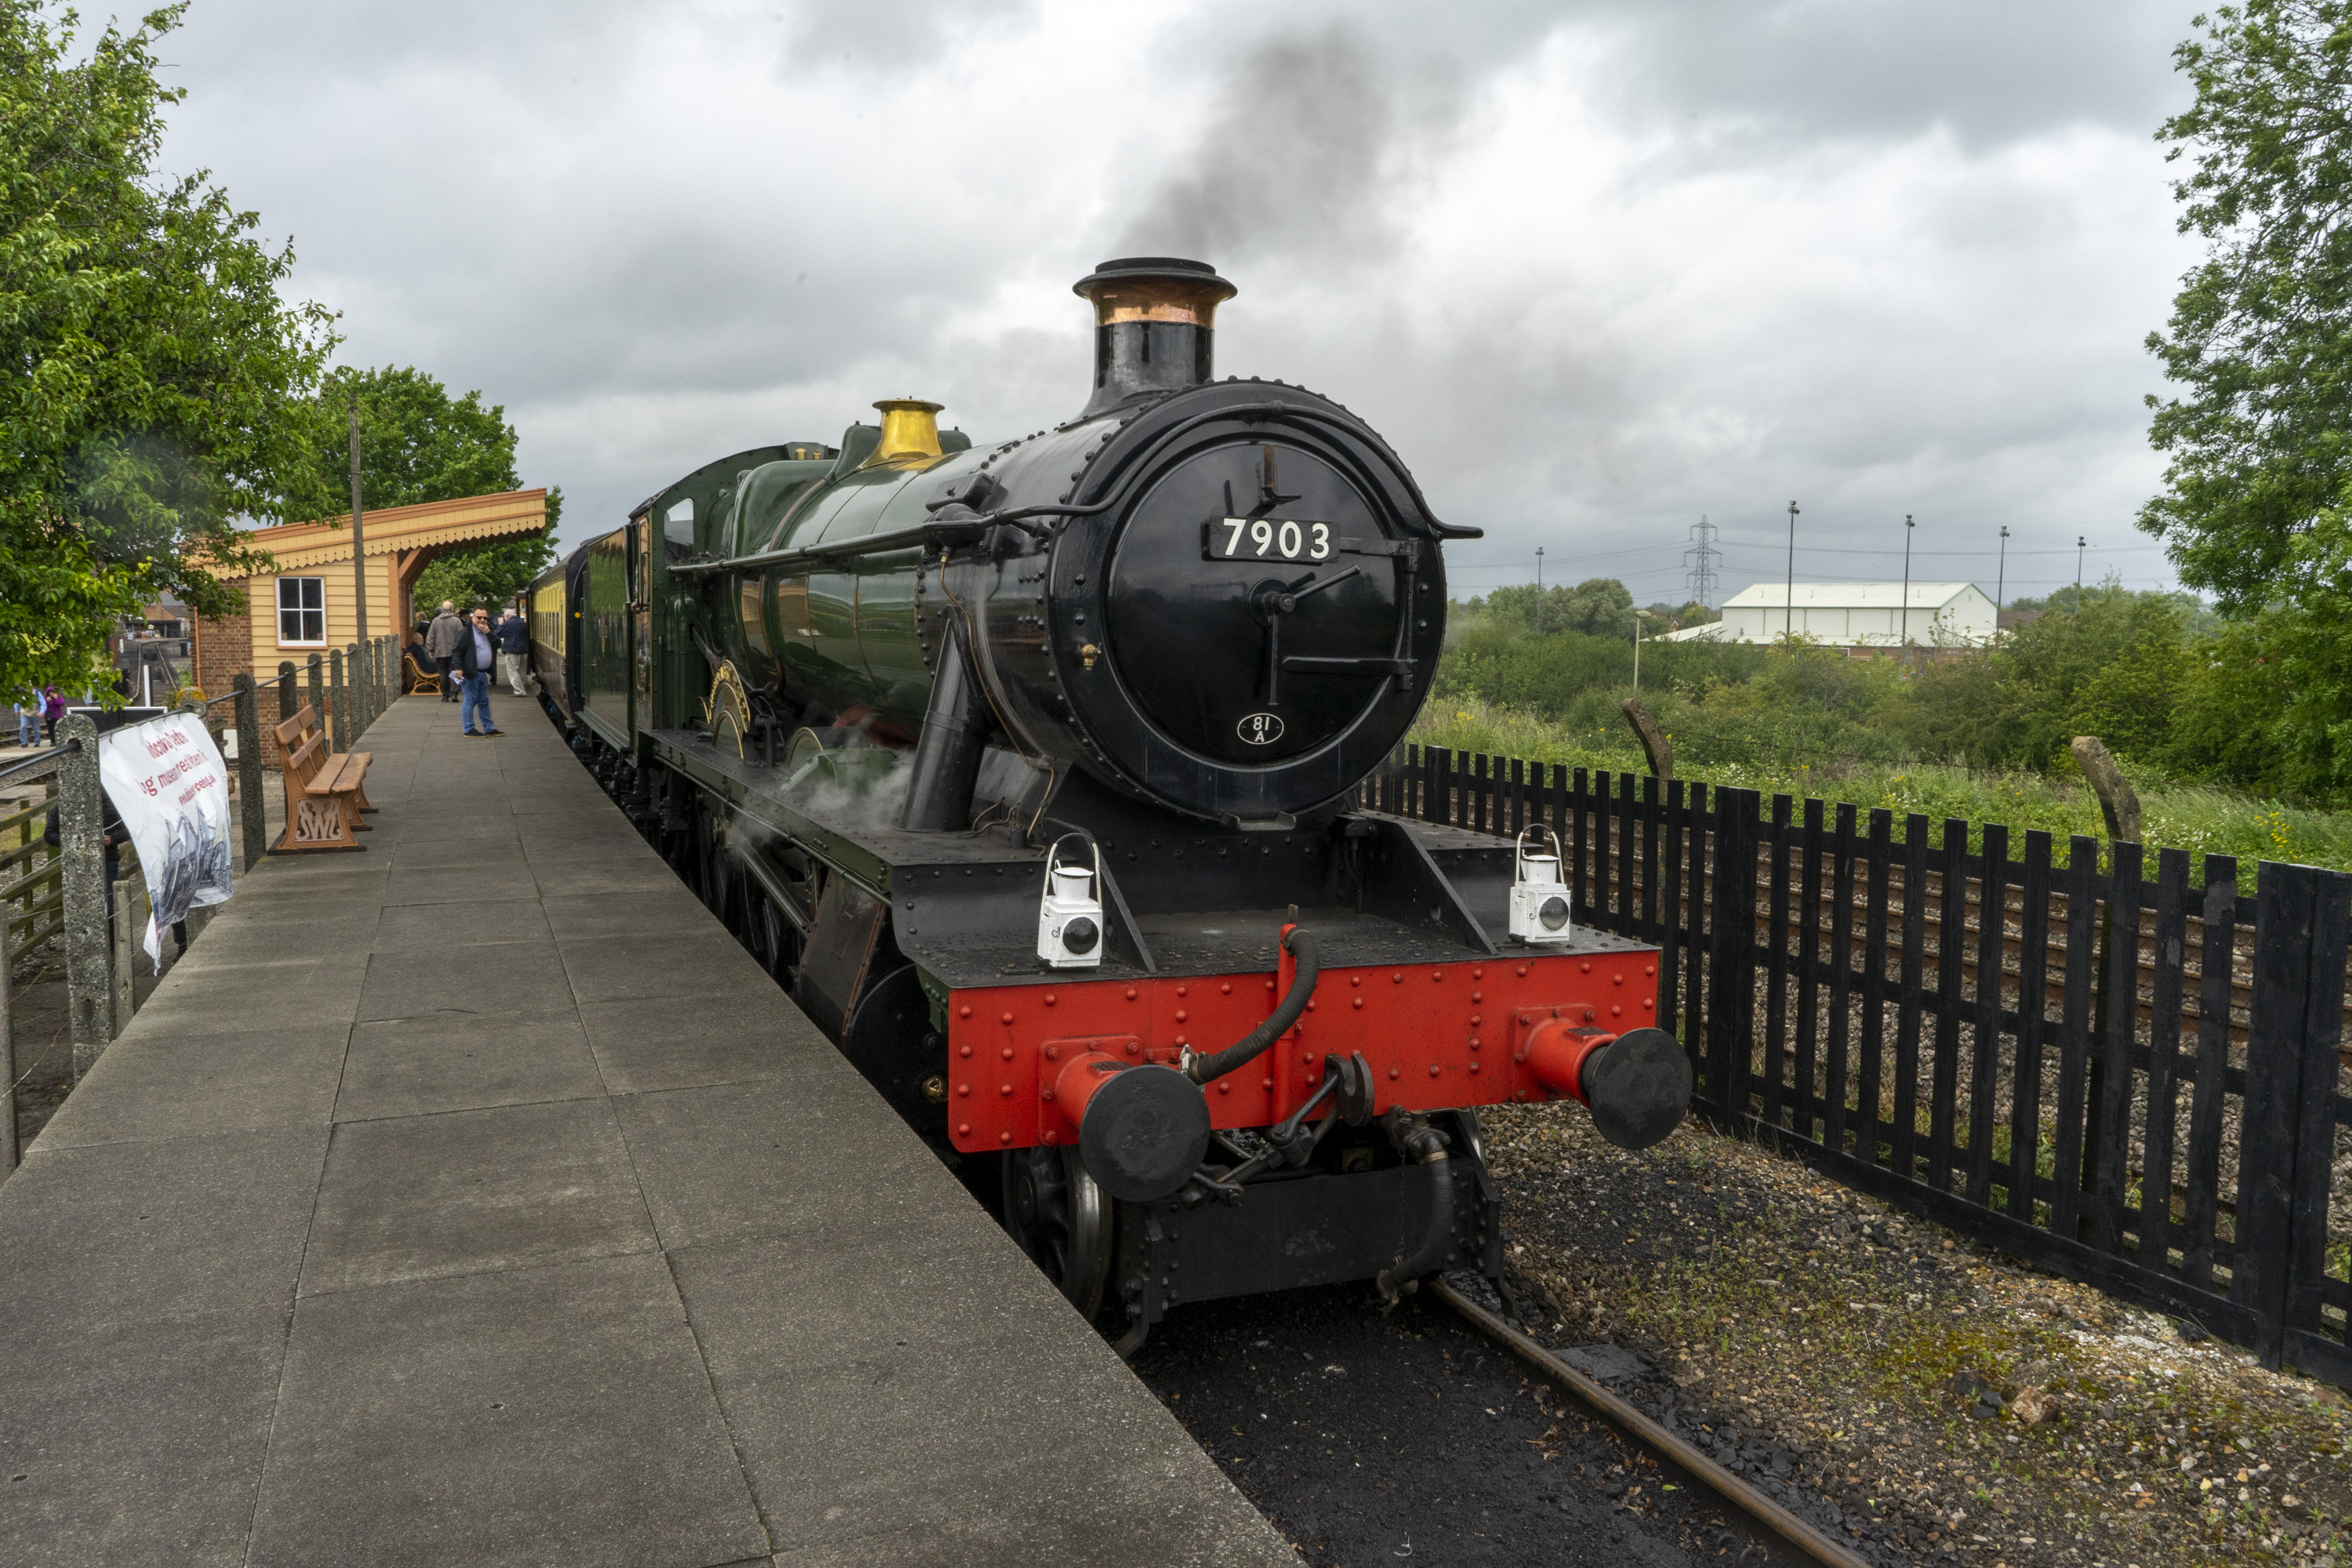 A traditional steam train pulling into a railway platform.